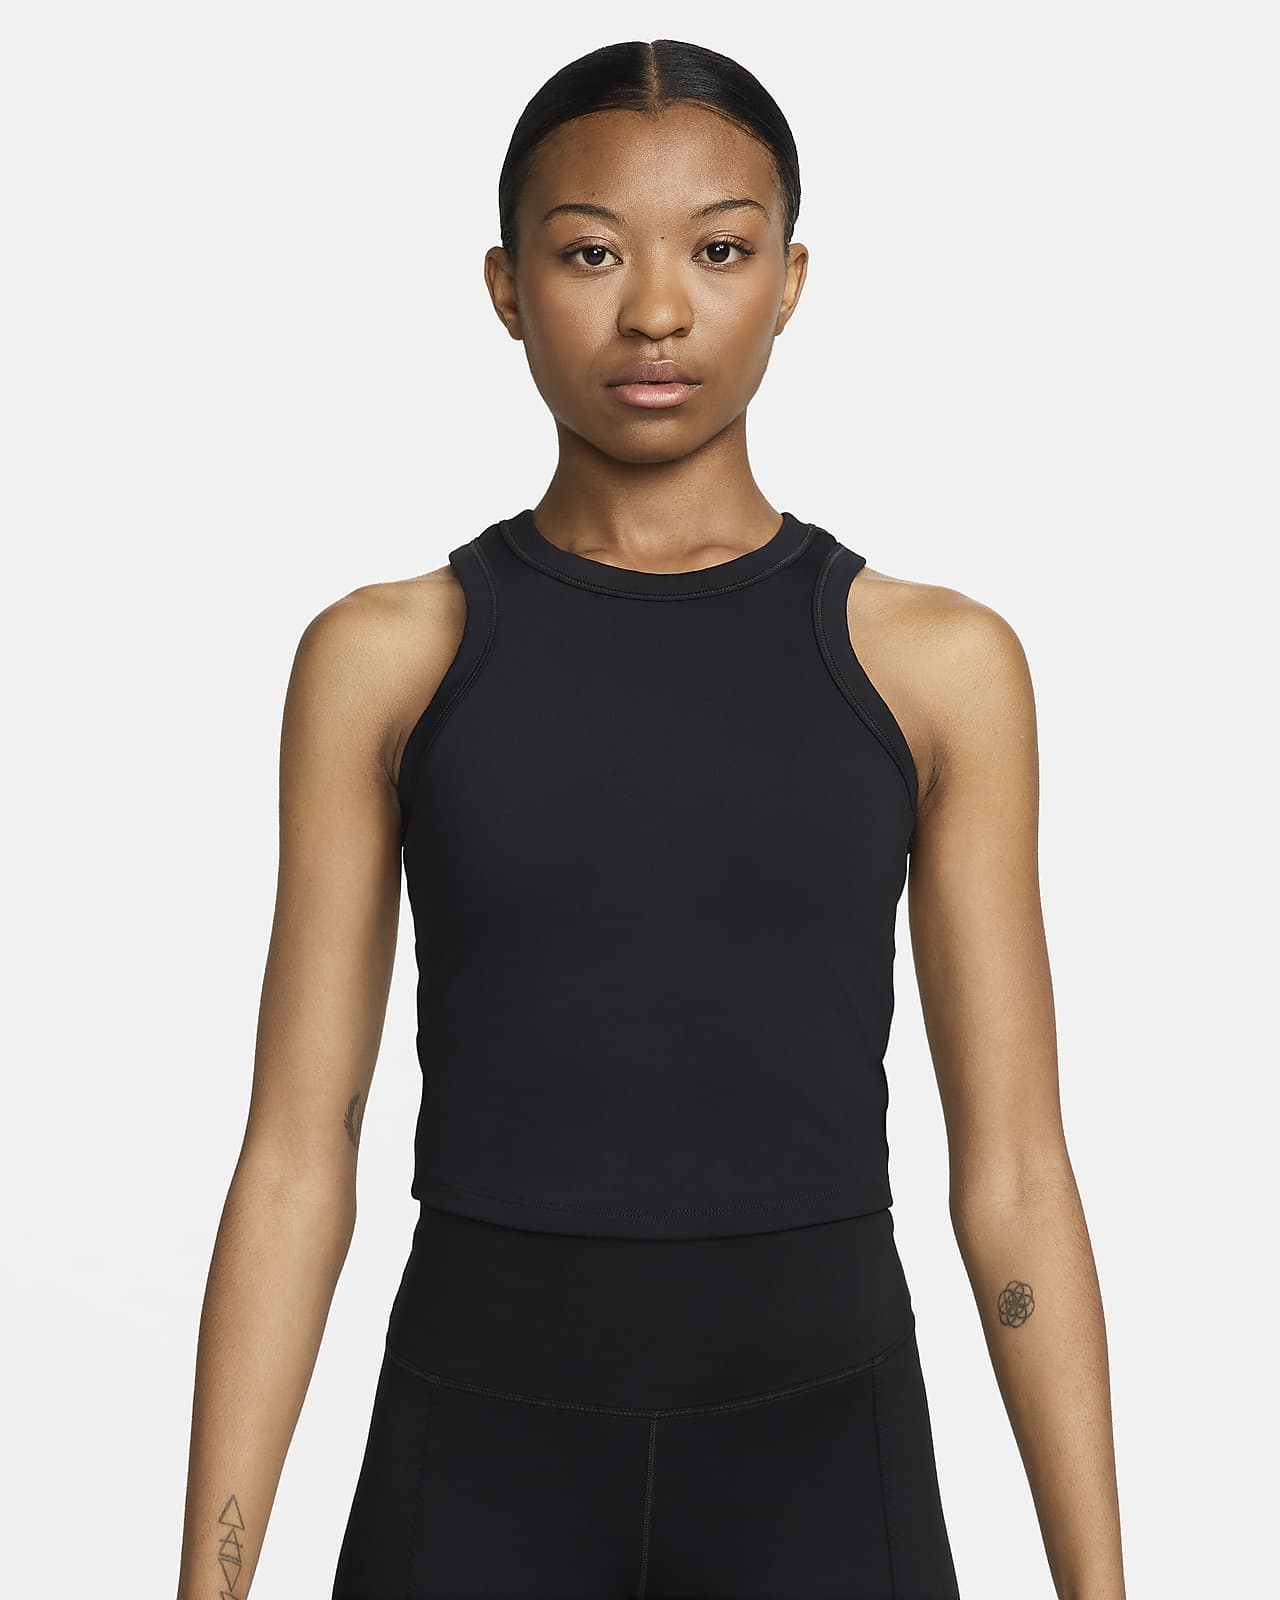 Nike One Fitted Crop top de tirants Dri-FIT - Dona